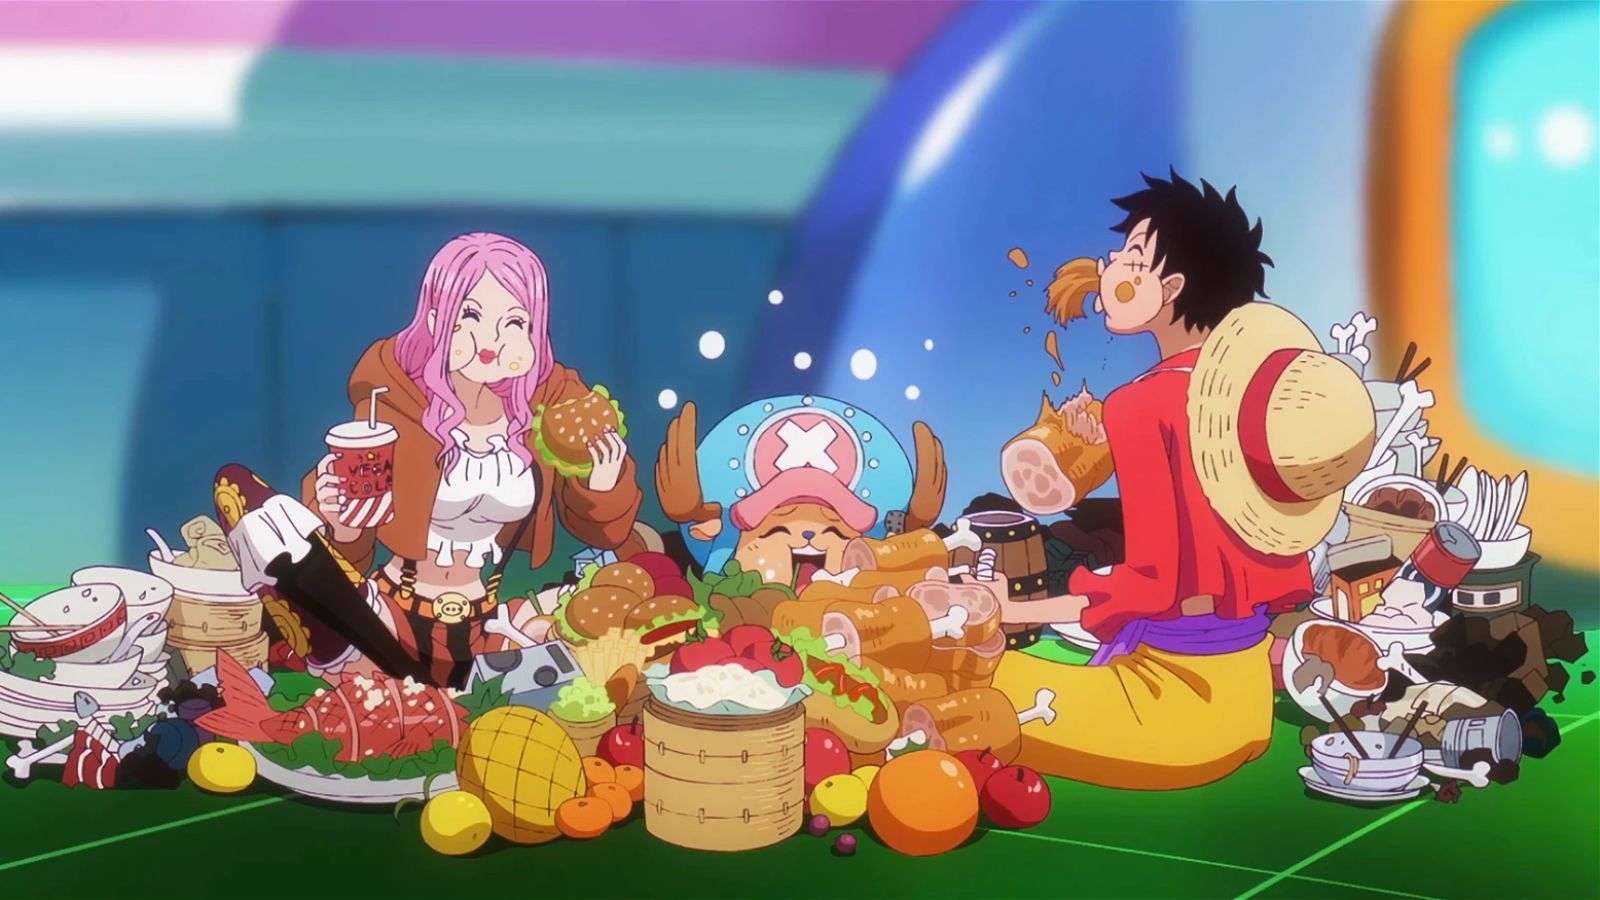 Luffy, Bonney, and Chopper eating